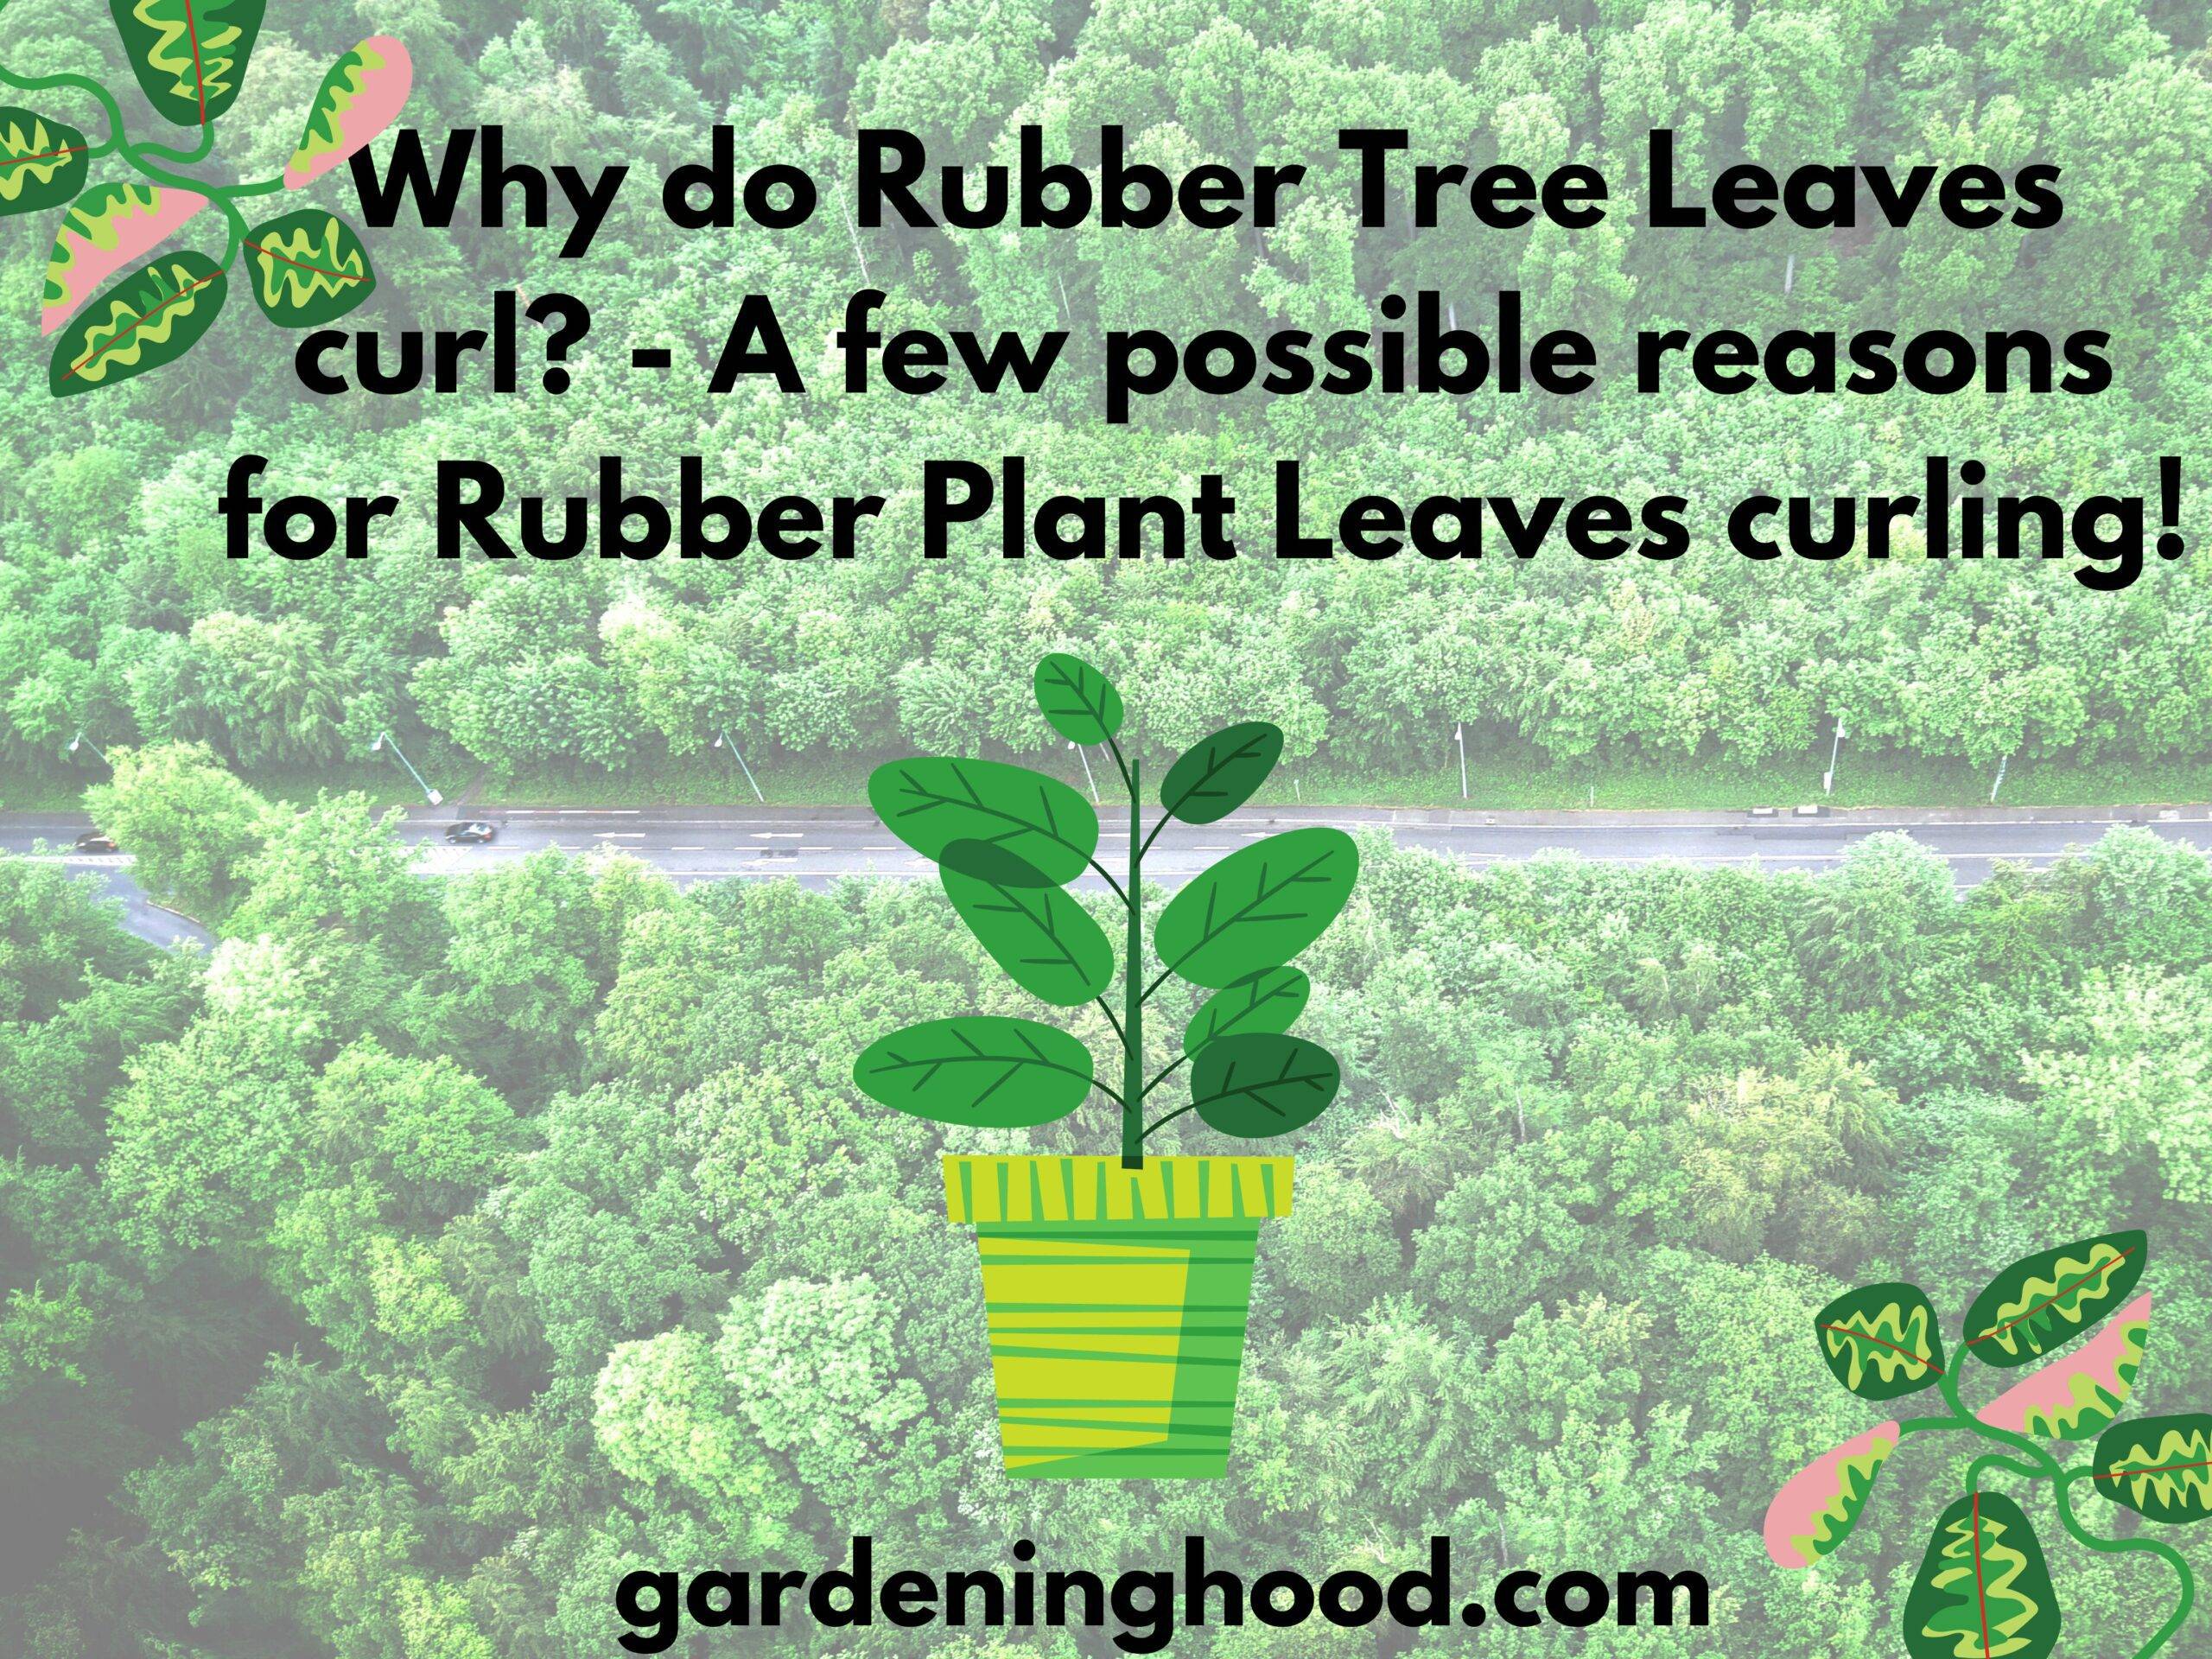 Why do Rubber Tree Leaves curl? - A few possible reasons for Rubber Plant Leaves curling!